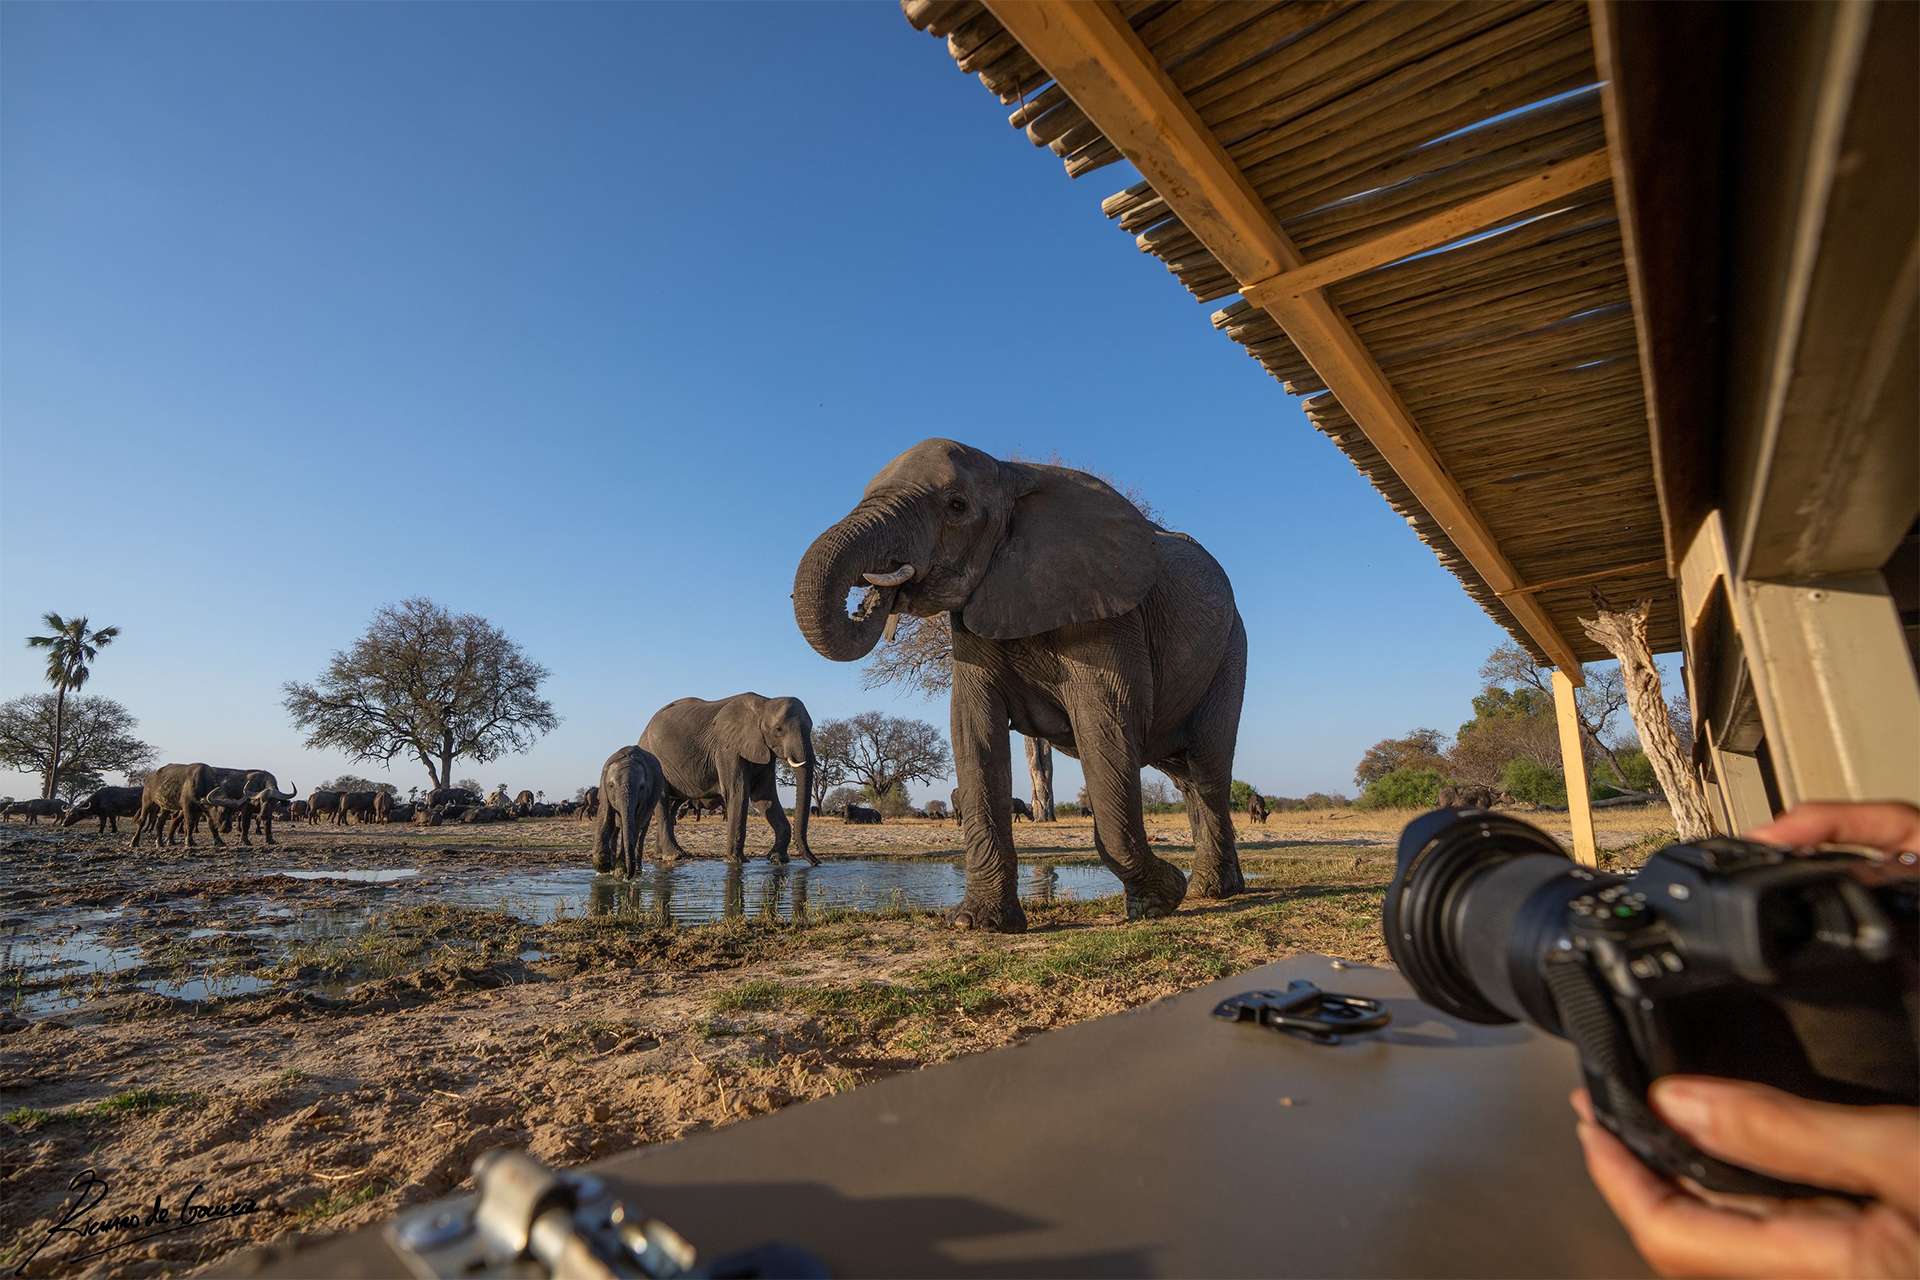 Nat Hab travelers are treated to private wildlife viewing from the comfort of their accommodations. Photographer captures up-close photos of elephants on a wildlife safari in Africa